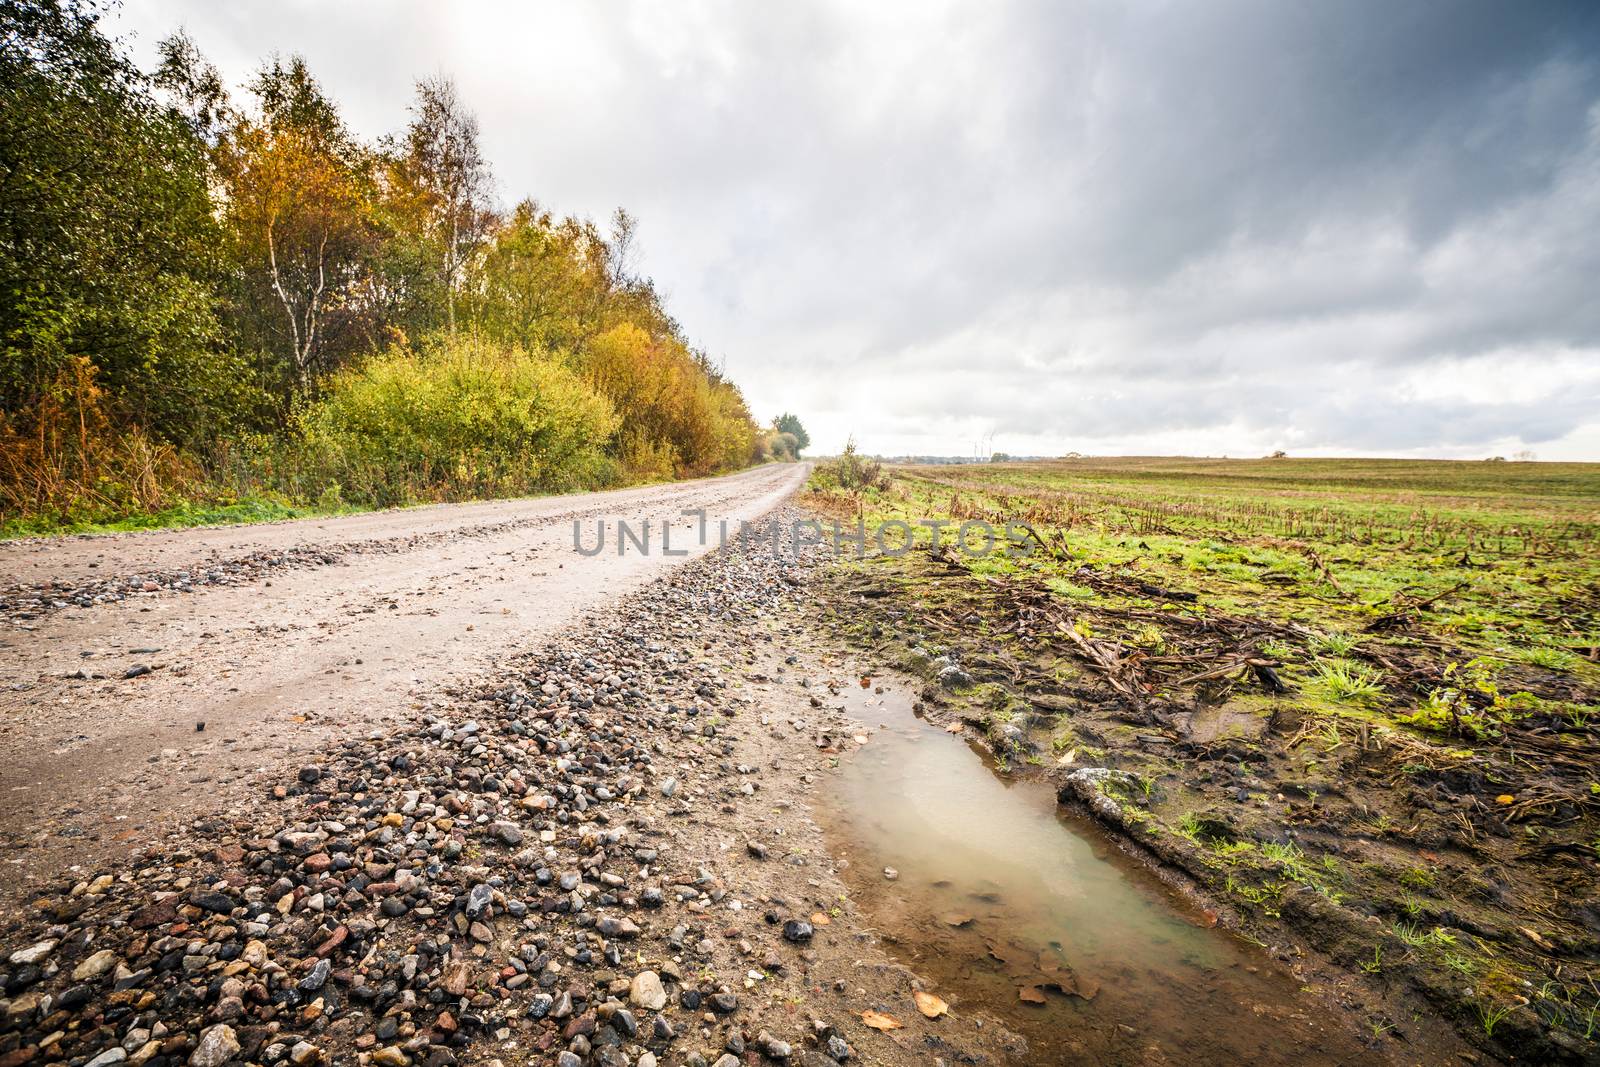 Puddle by a dirt road with small pebbles in the fall with trees in beautiful autumn colors